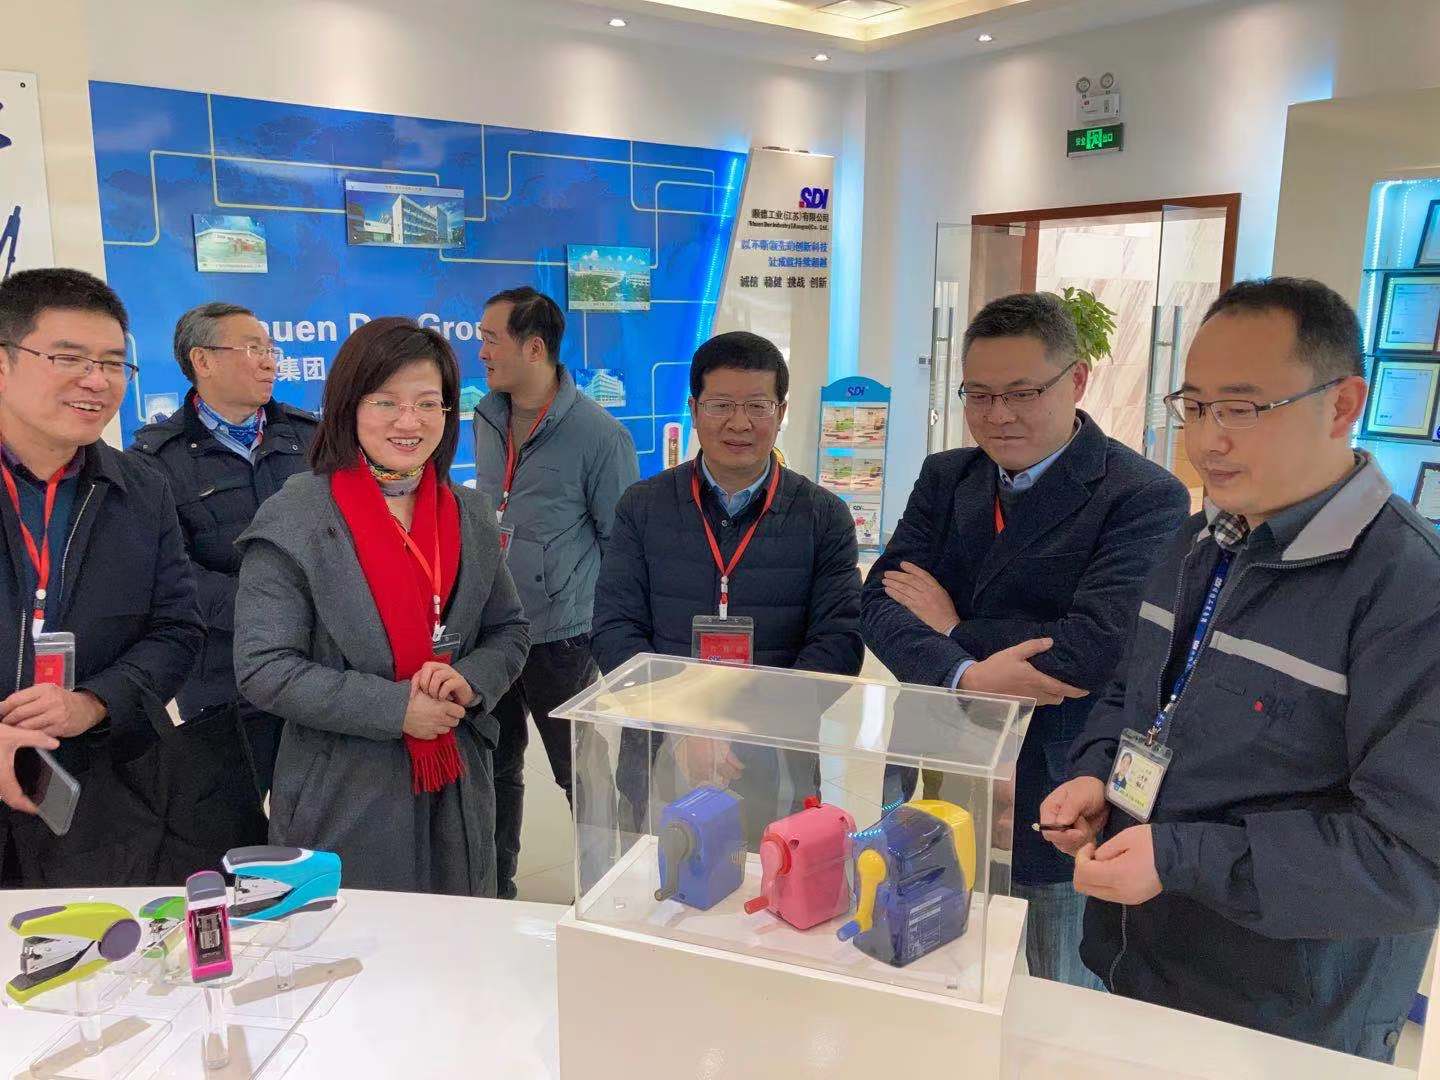 Chen Yuebo, Director of Wujin District Taiwan Office, Changzhou City, visited Shunde Industry for research and exchange